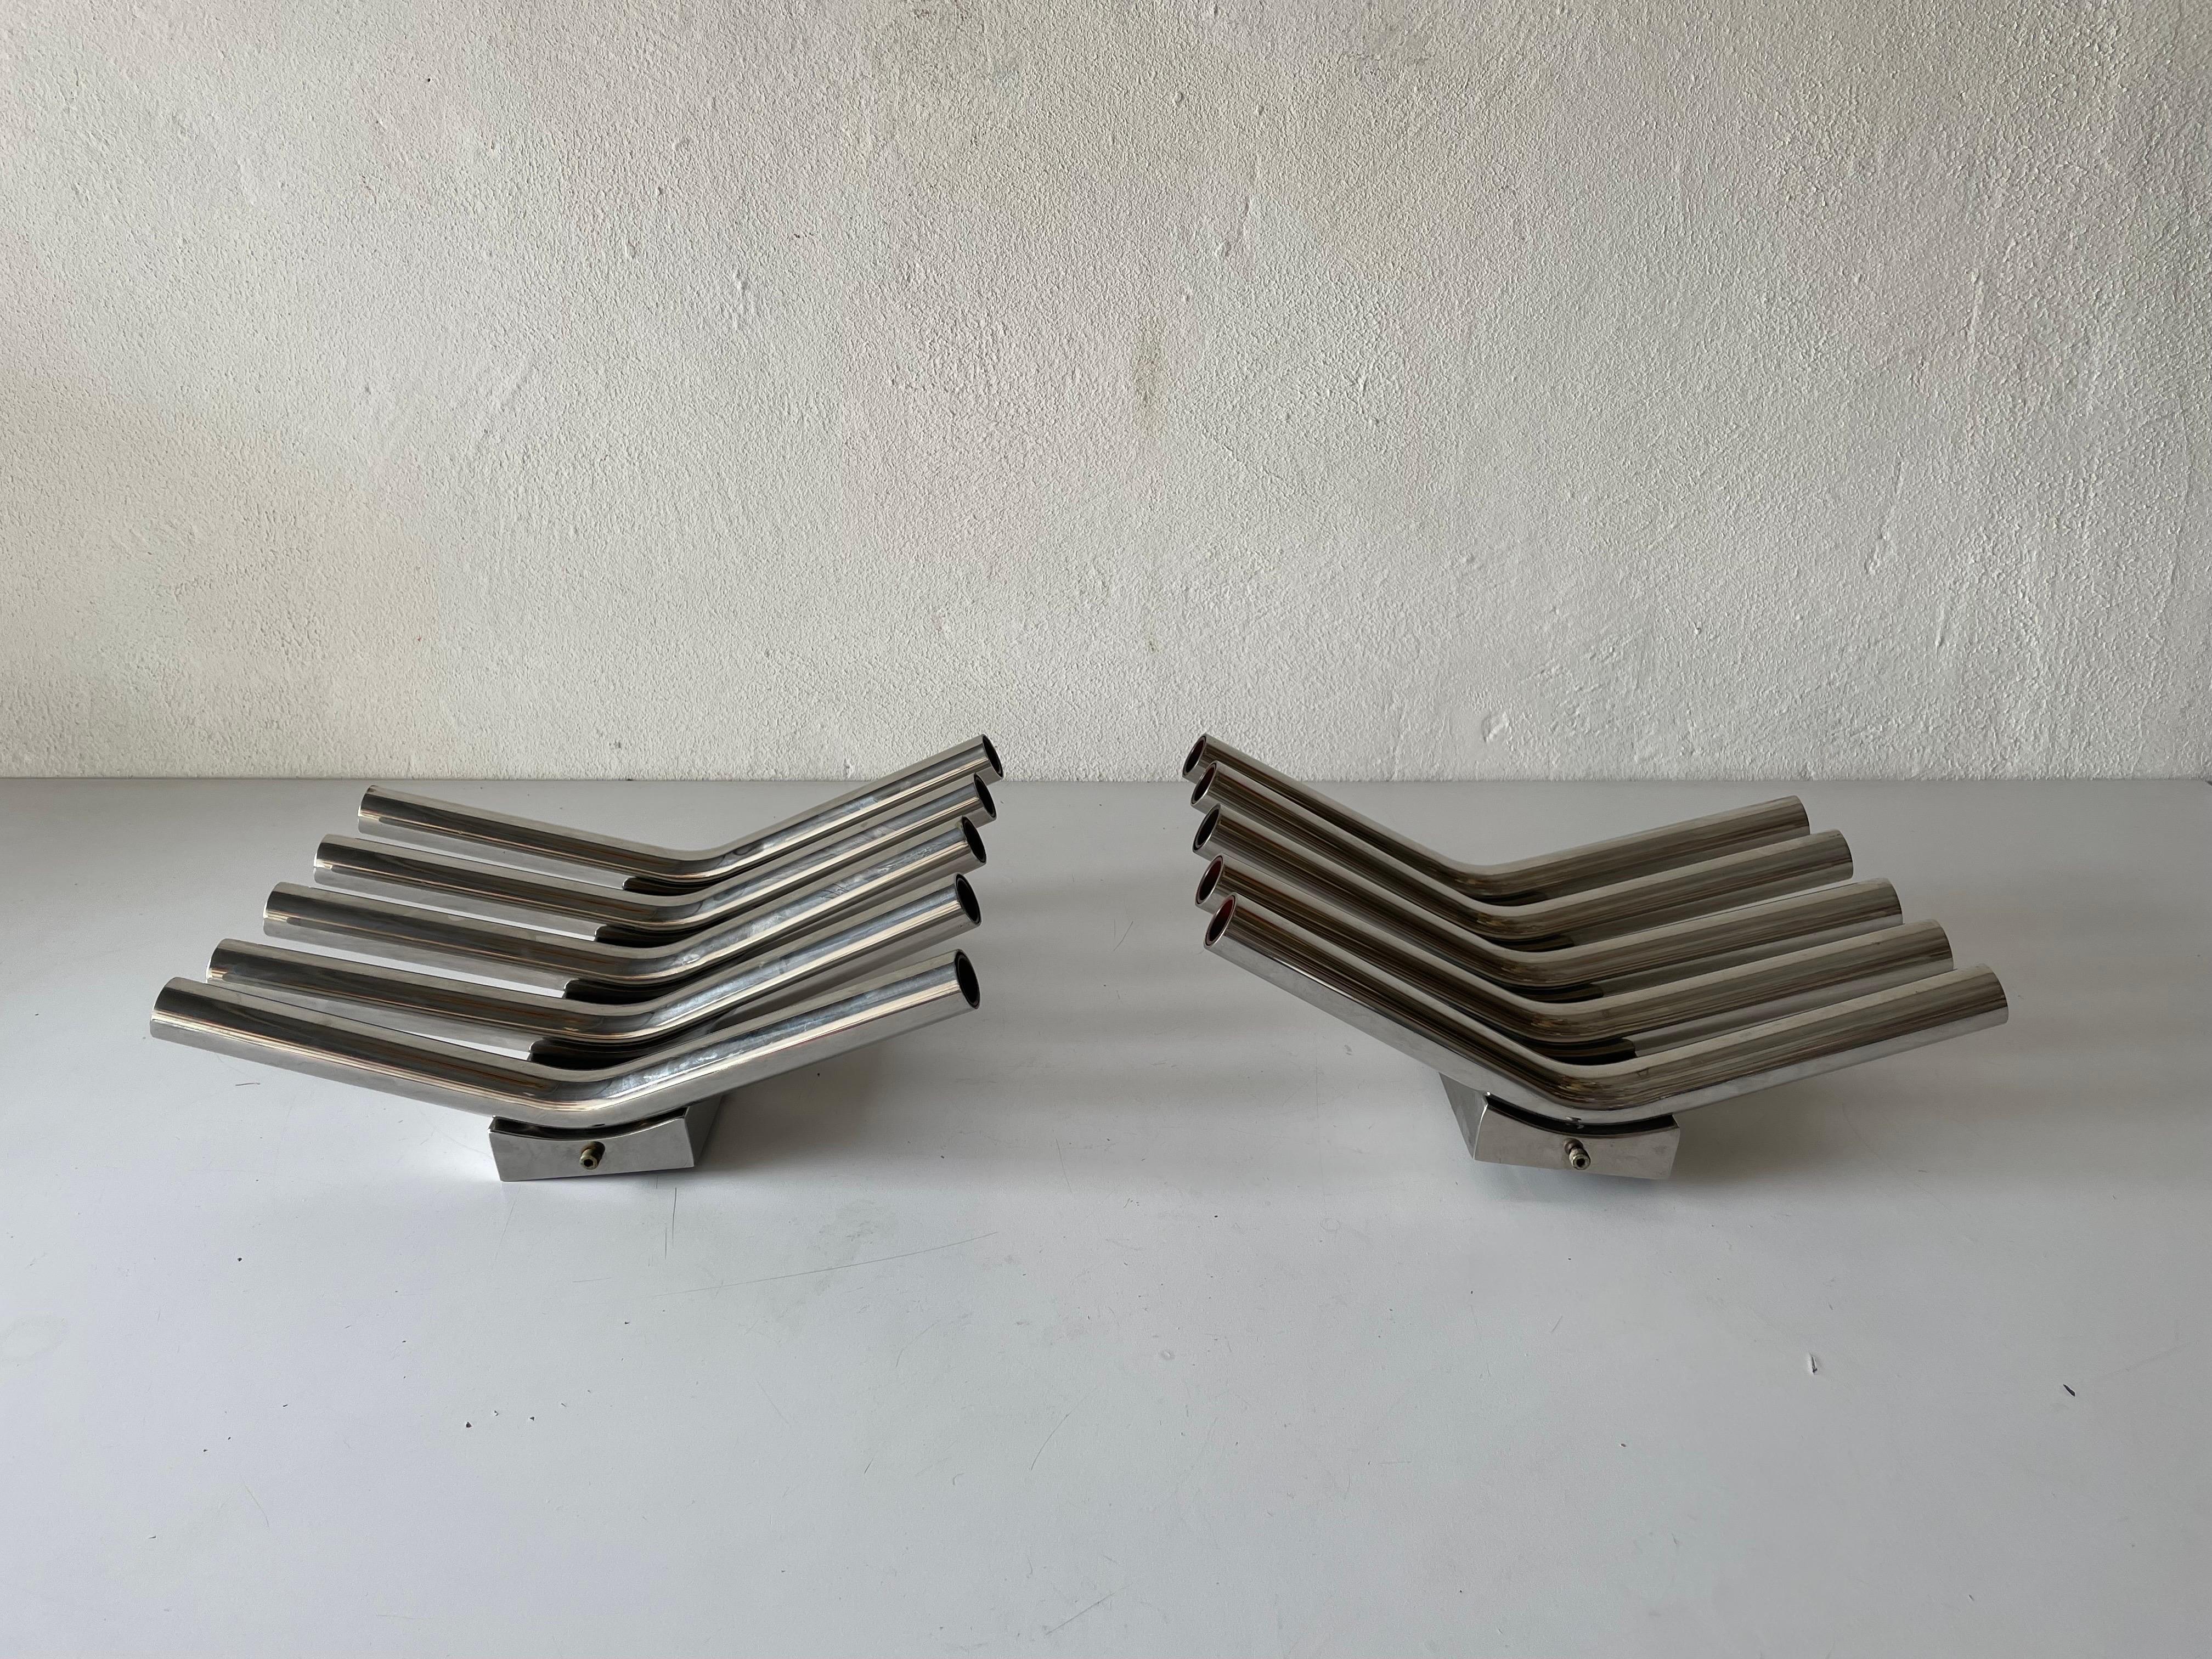 5-armed Tubes Design Pair of Chrome Italian Sconces by Reggiani, 1960s Italy For Sale 3